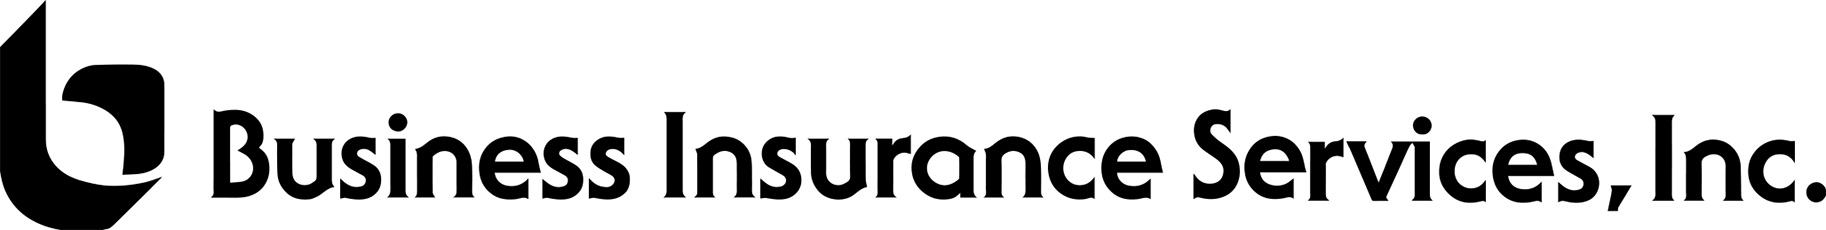 6. Business Insurance Services (Silver)